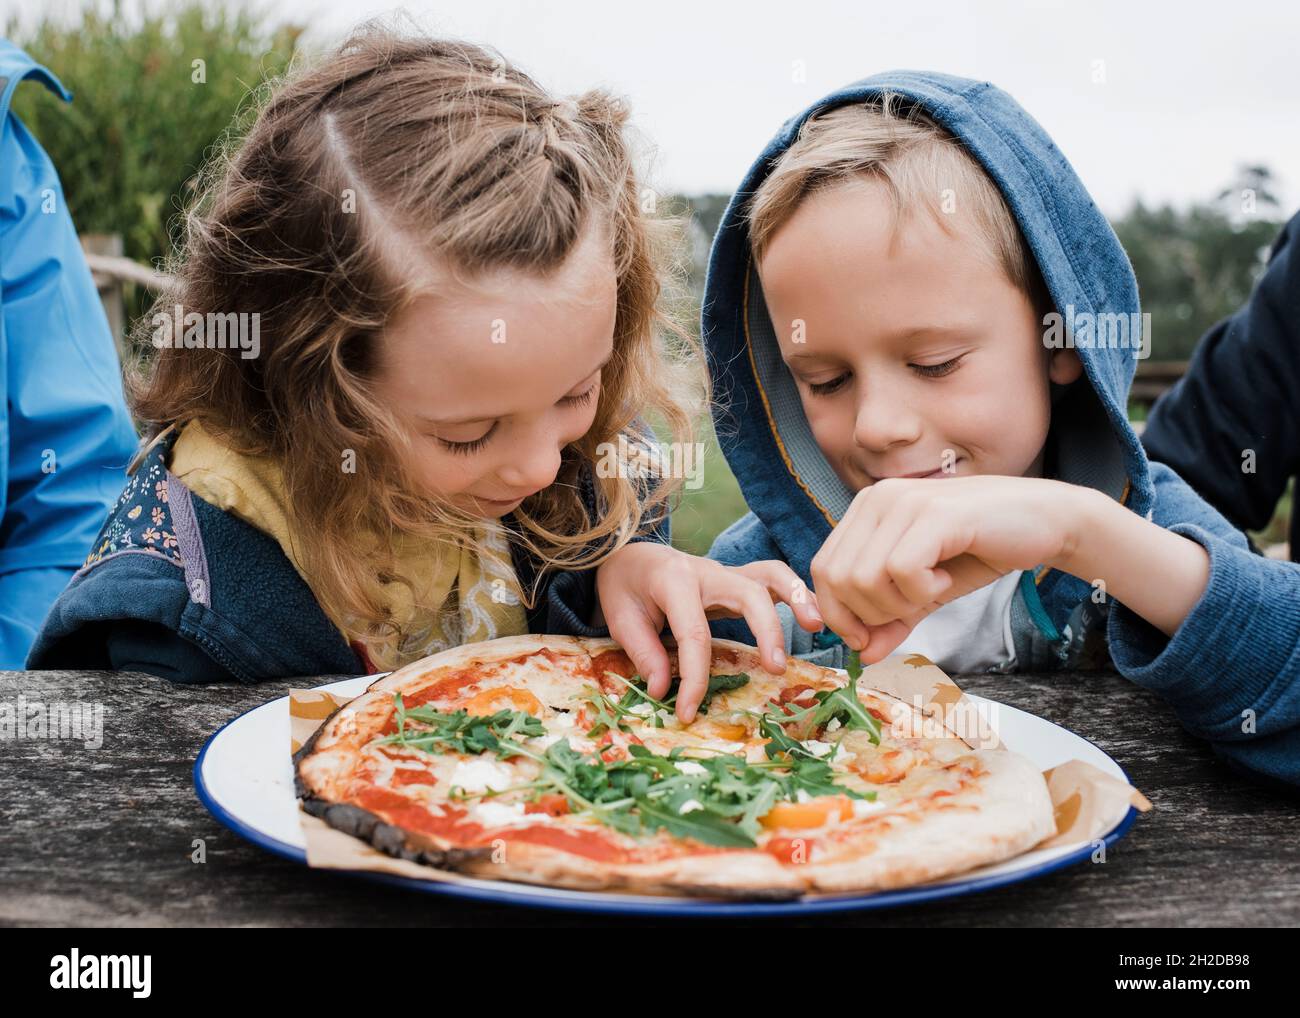 girl and boy sharing a pizza together at an outdoor restaurant Stock Photo